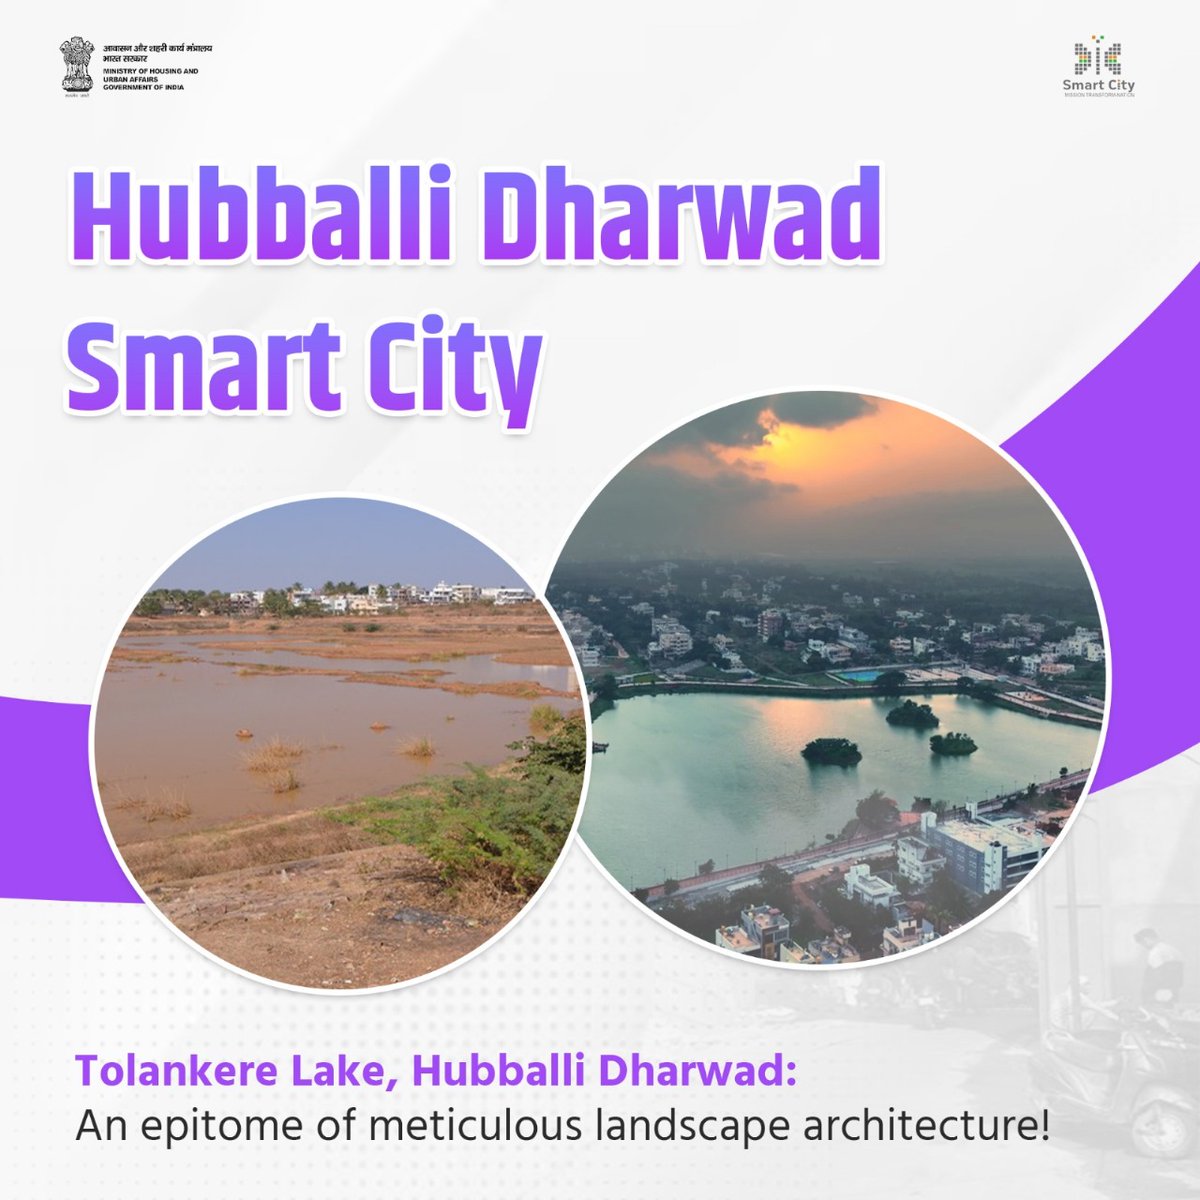 The #Tolanakere lake, nestled in a bustling urban area, has become a hub for fostering public health, community engagement, and social cohesion. #HubballiDharwadSmartCity #SmartCityKiSmartKahani